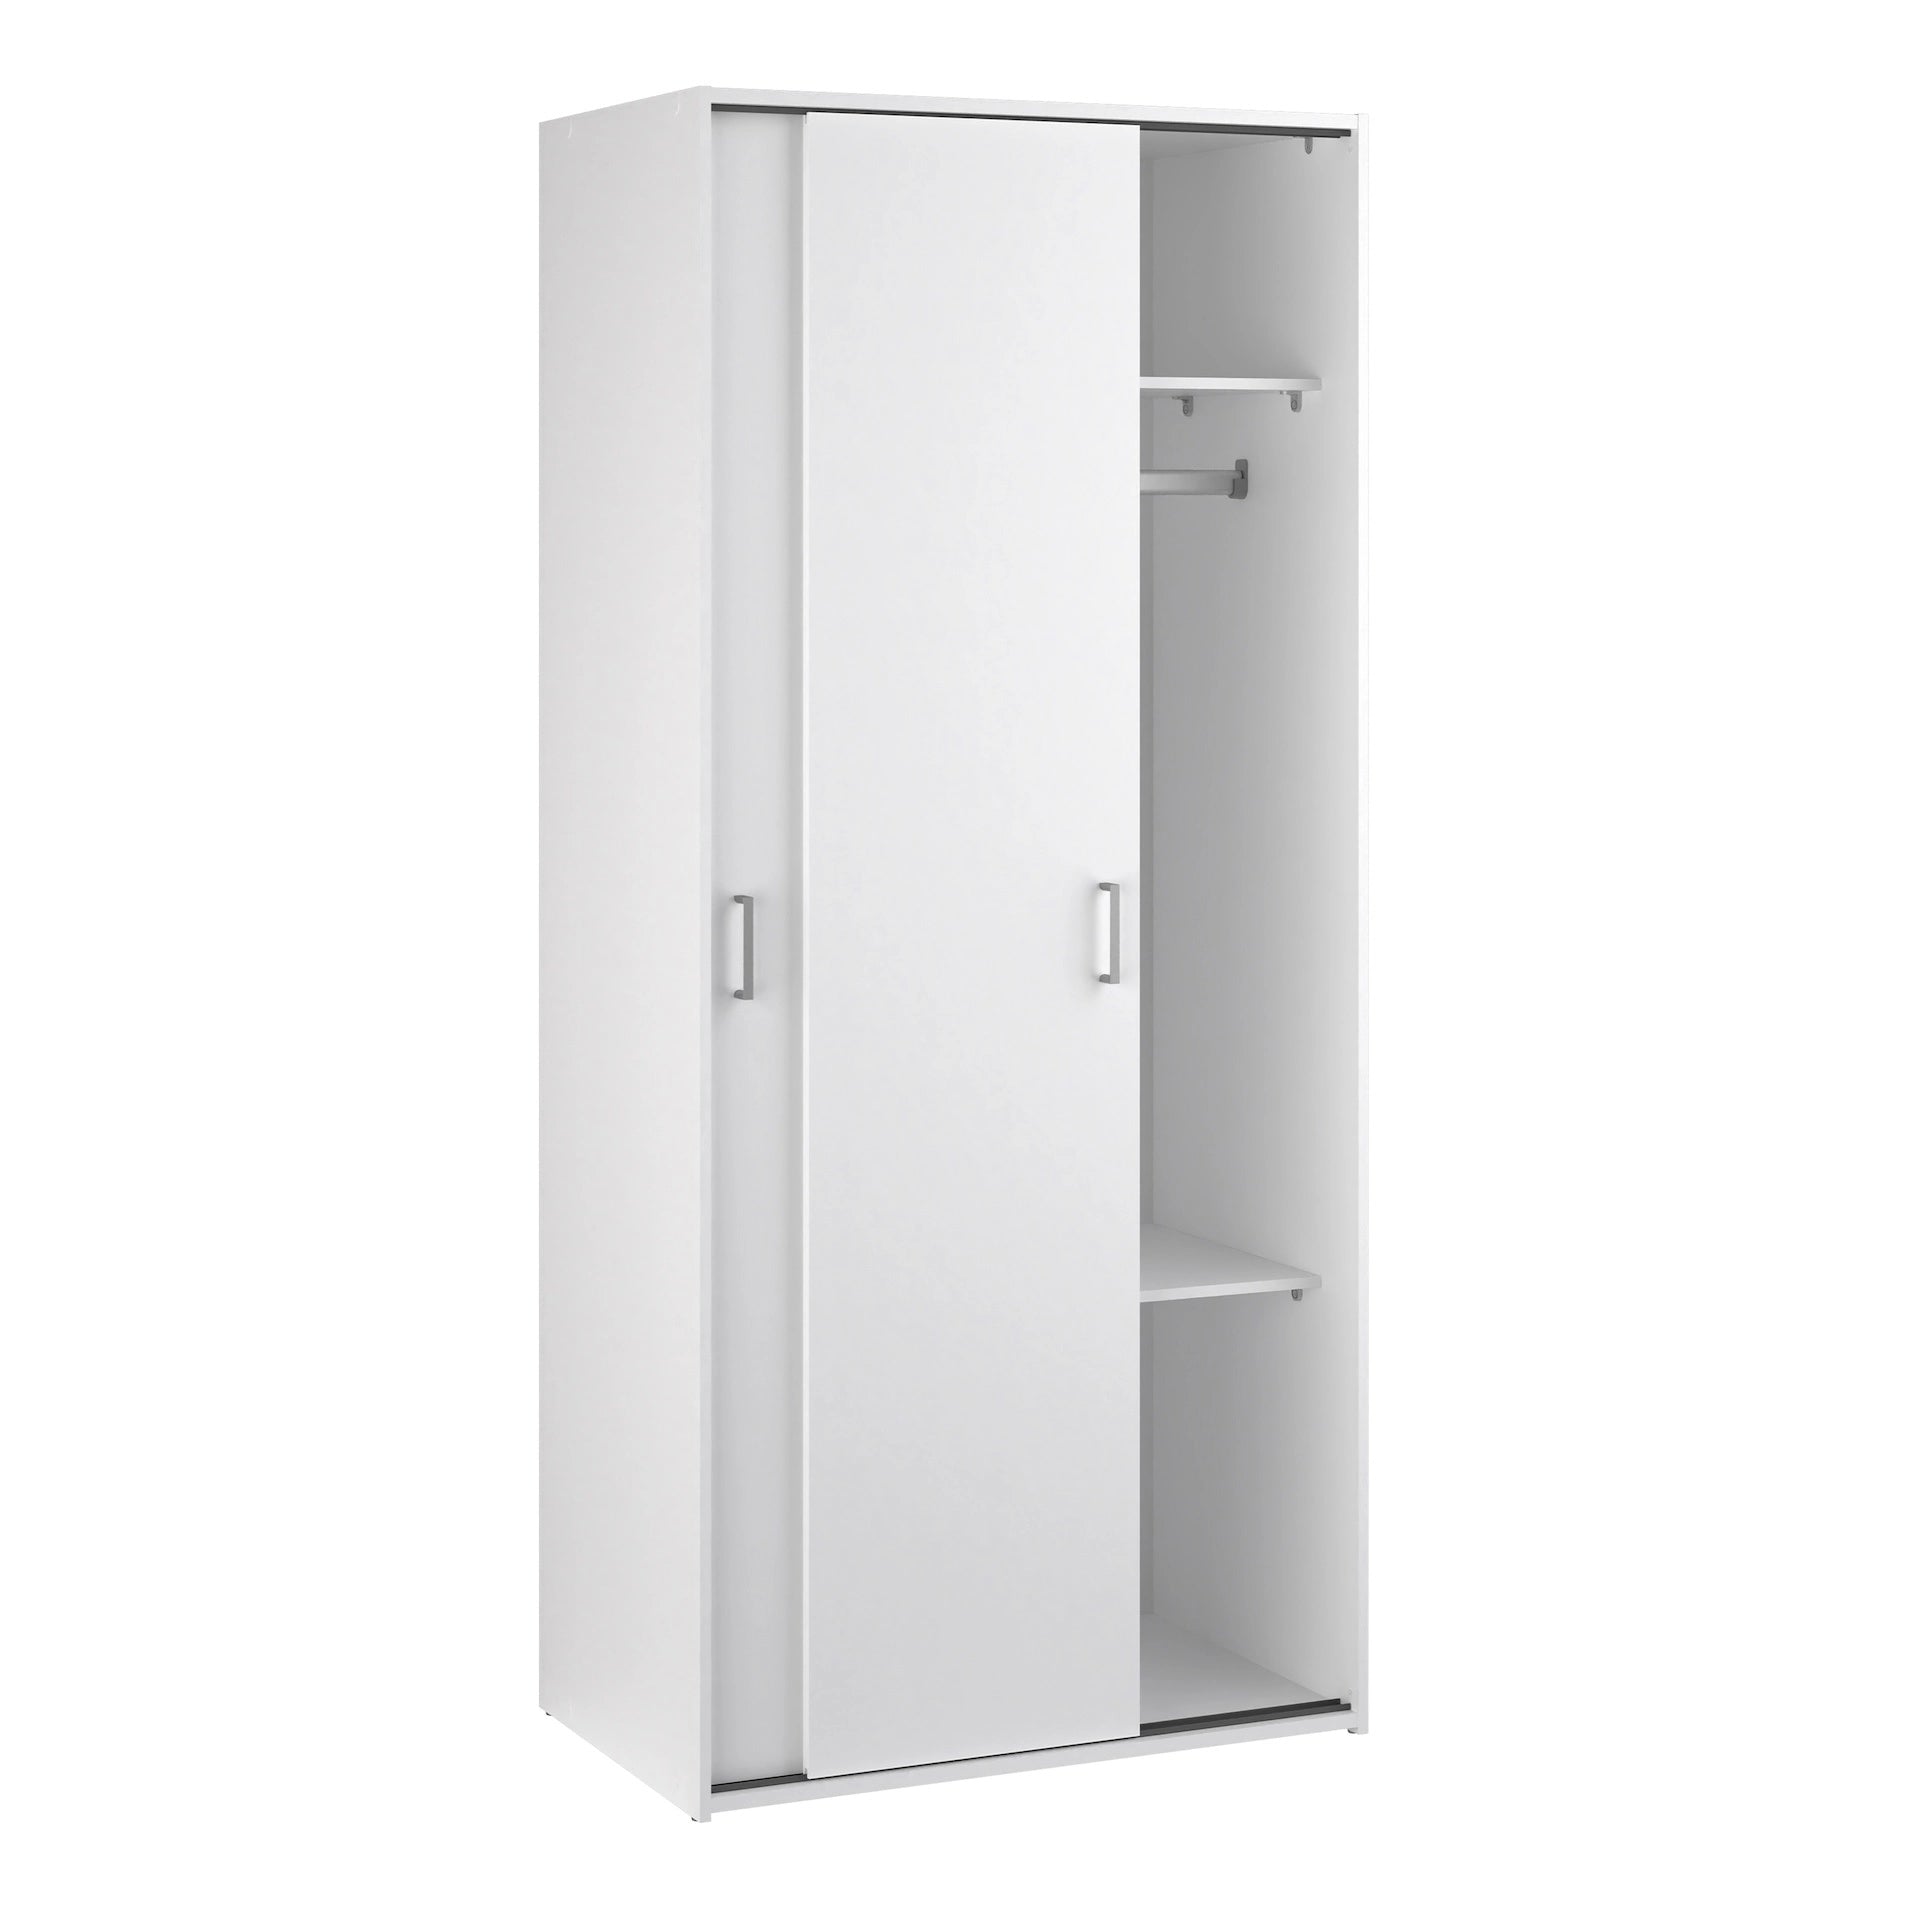 Furniture To Go Space Wardrobe with 2 Sliding Doors in White